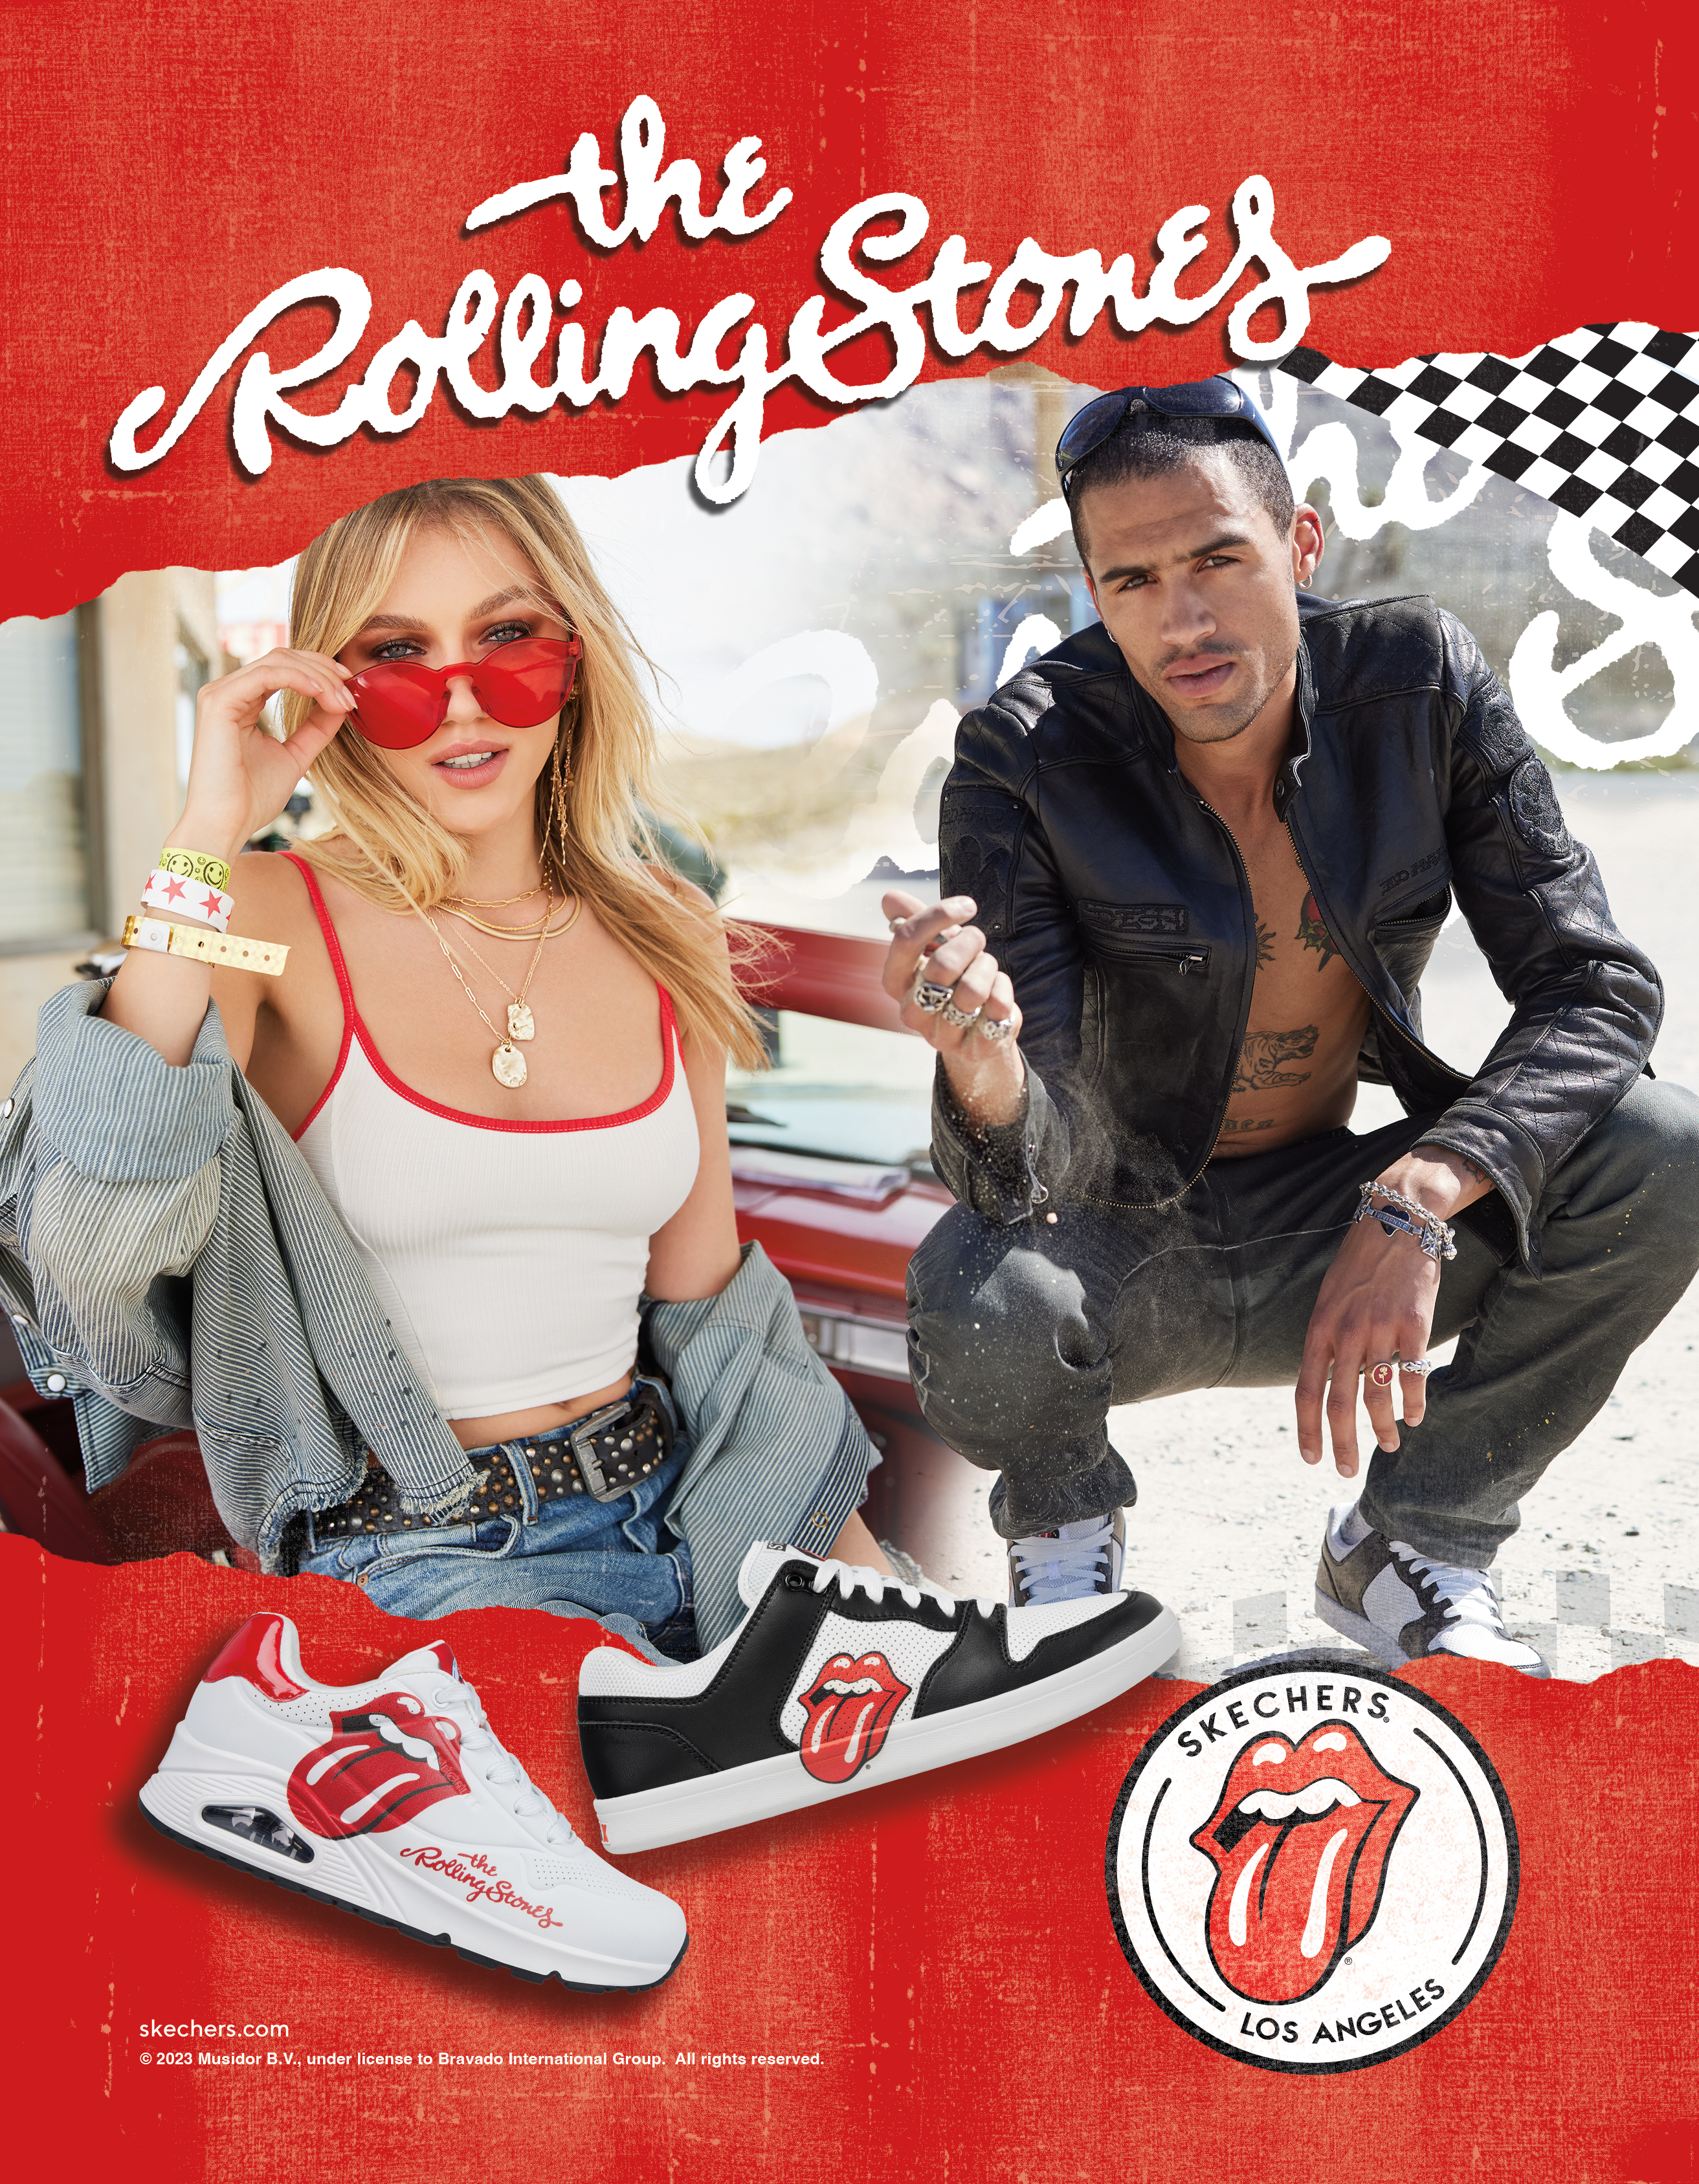 Rocks Rolling Stones New Collab | Business